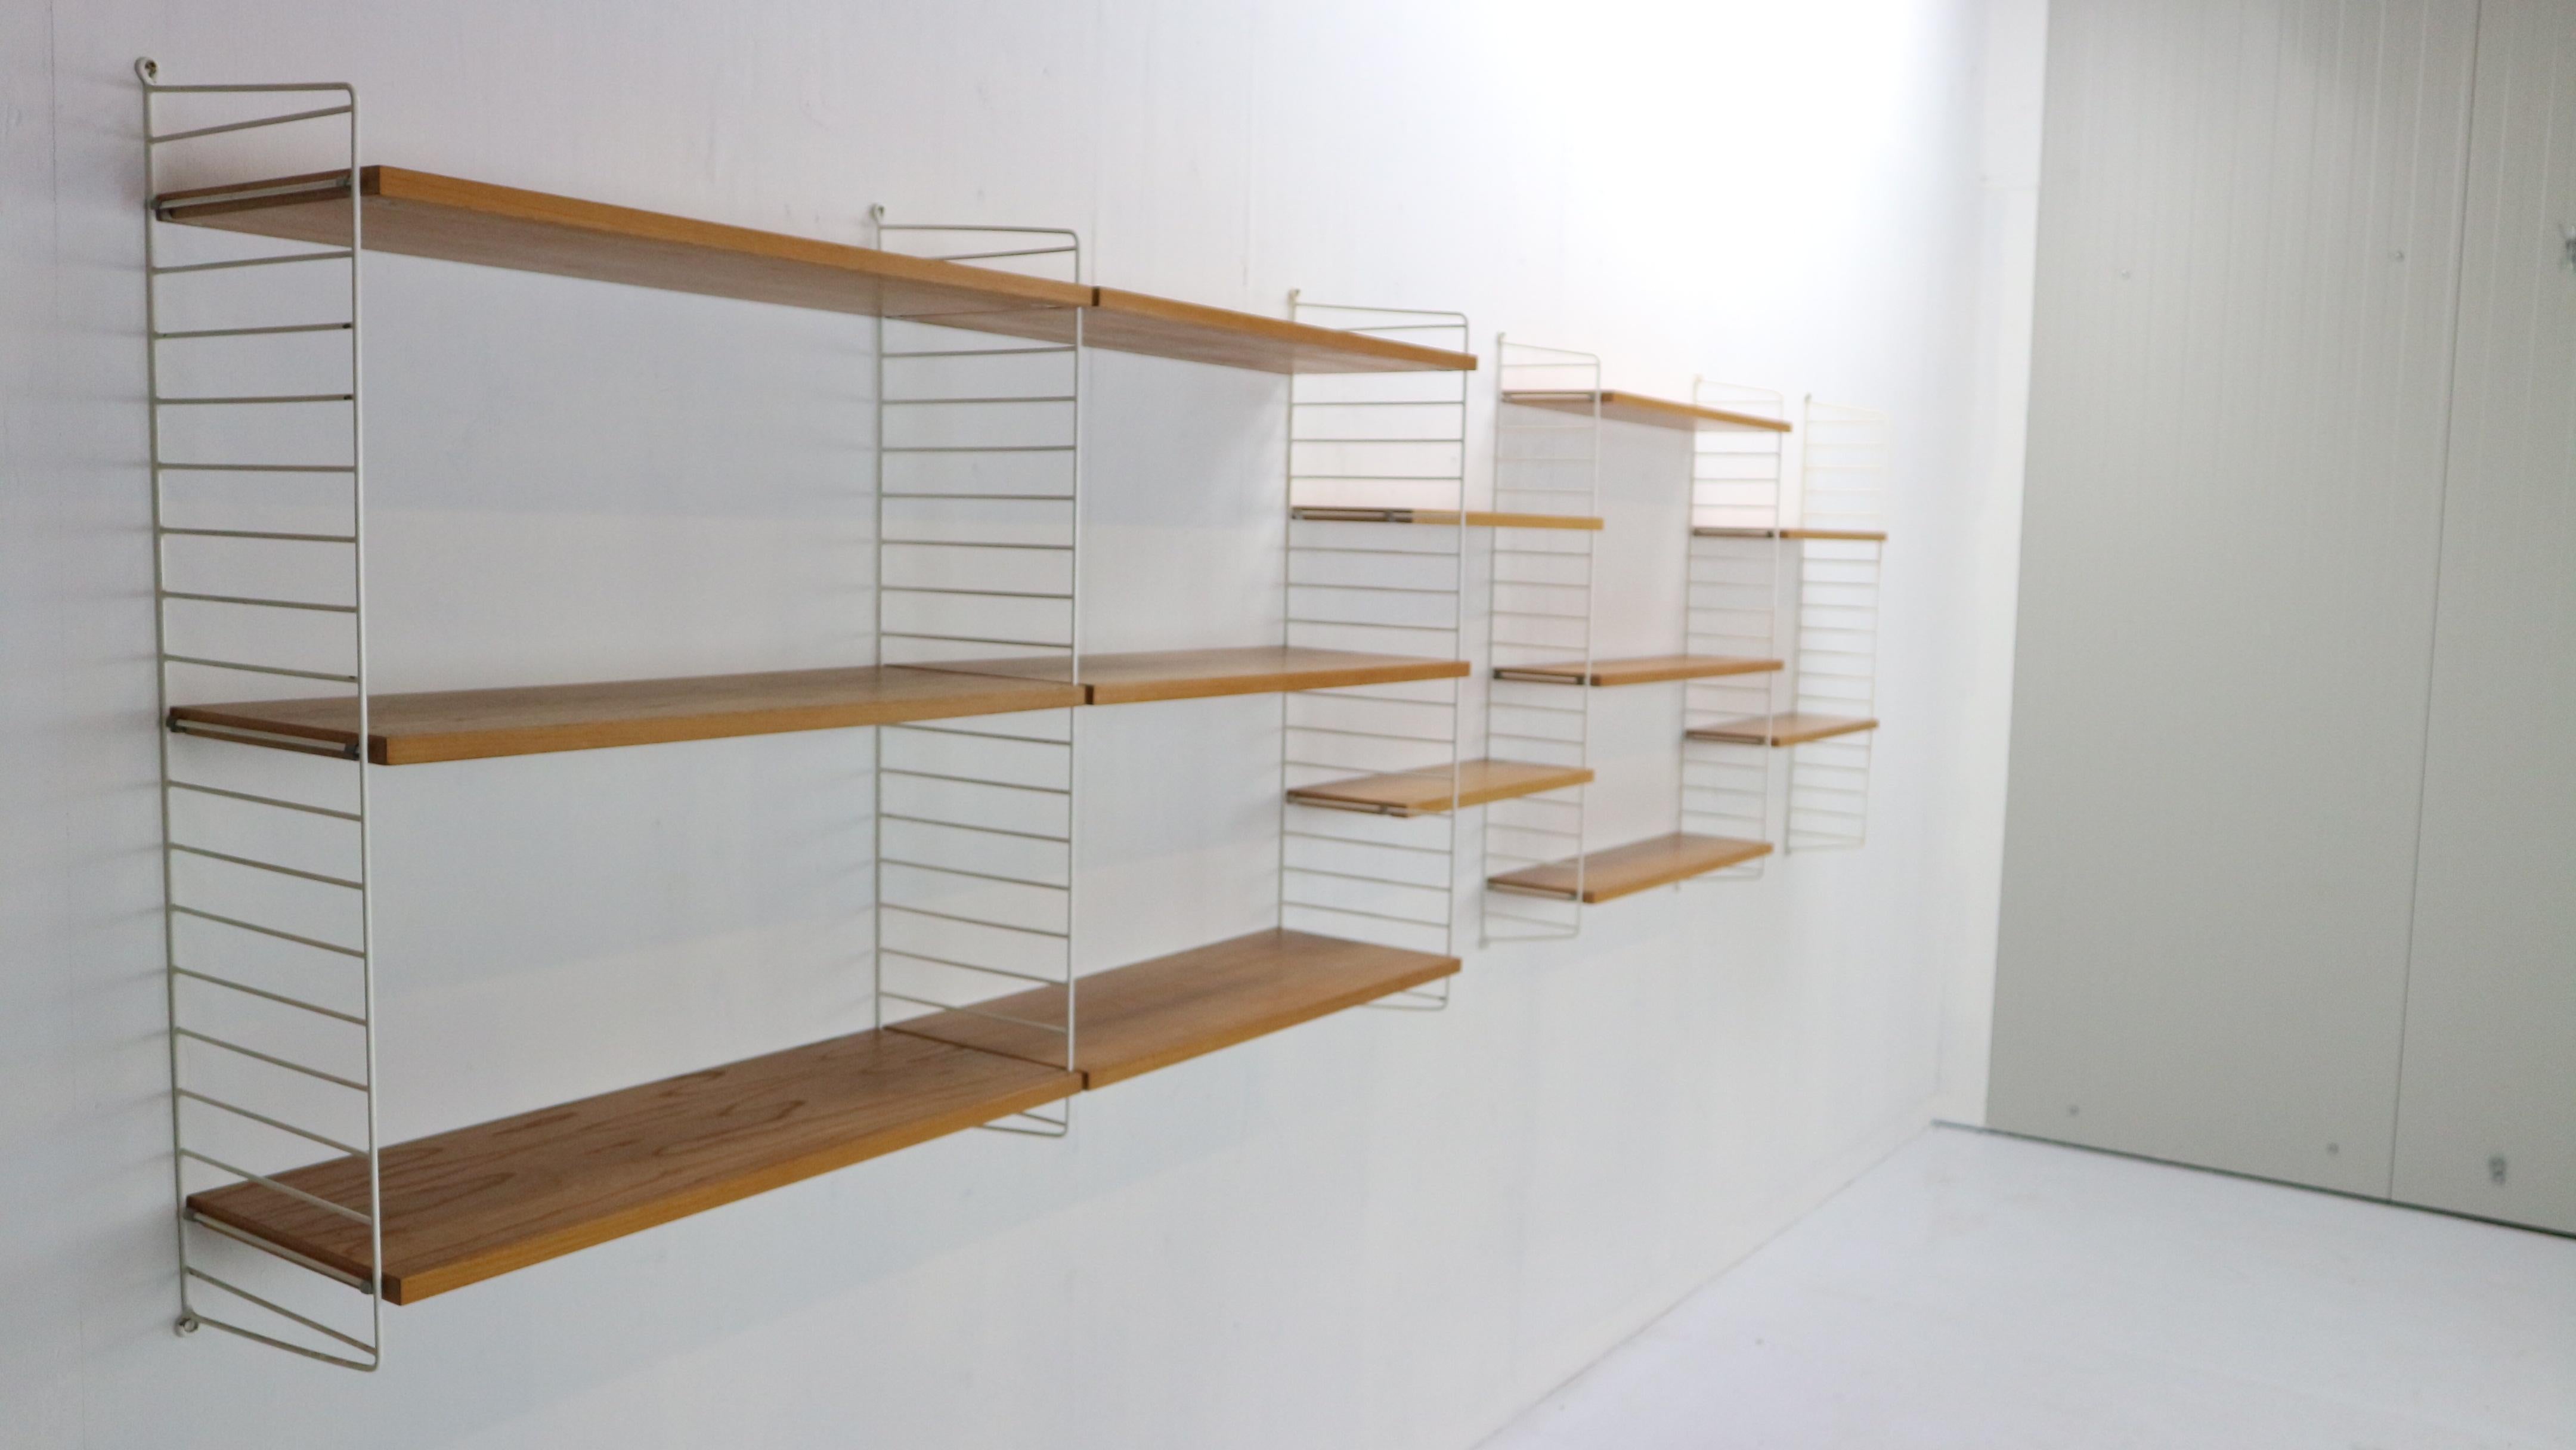 Extra large shelving system designed by Nils Nisse Strinning and manufactured by String Design in 1960s period, Sweden.
Minimalistic shelving united made from teak wooden shelves (13 pieces) and white metal uprights (6 pieces).
Shelves are easily